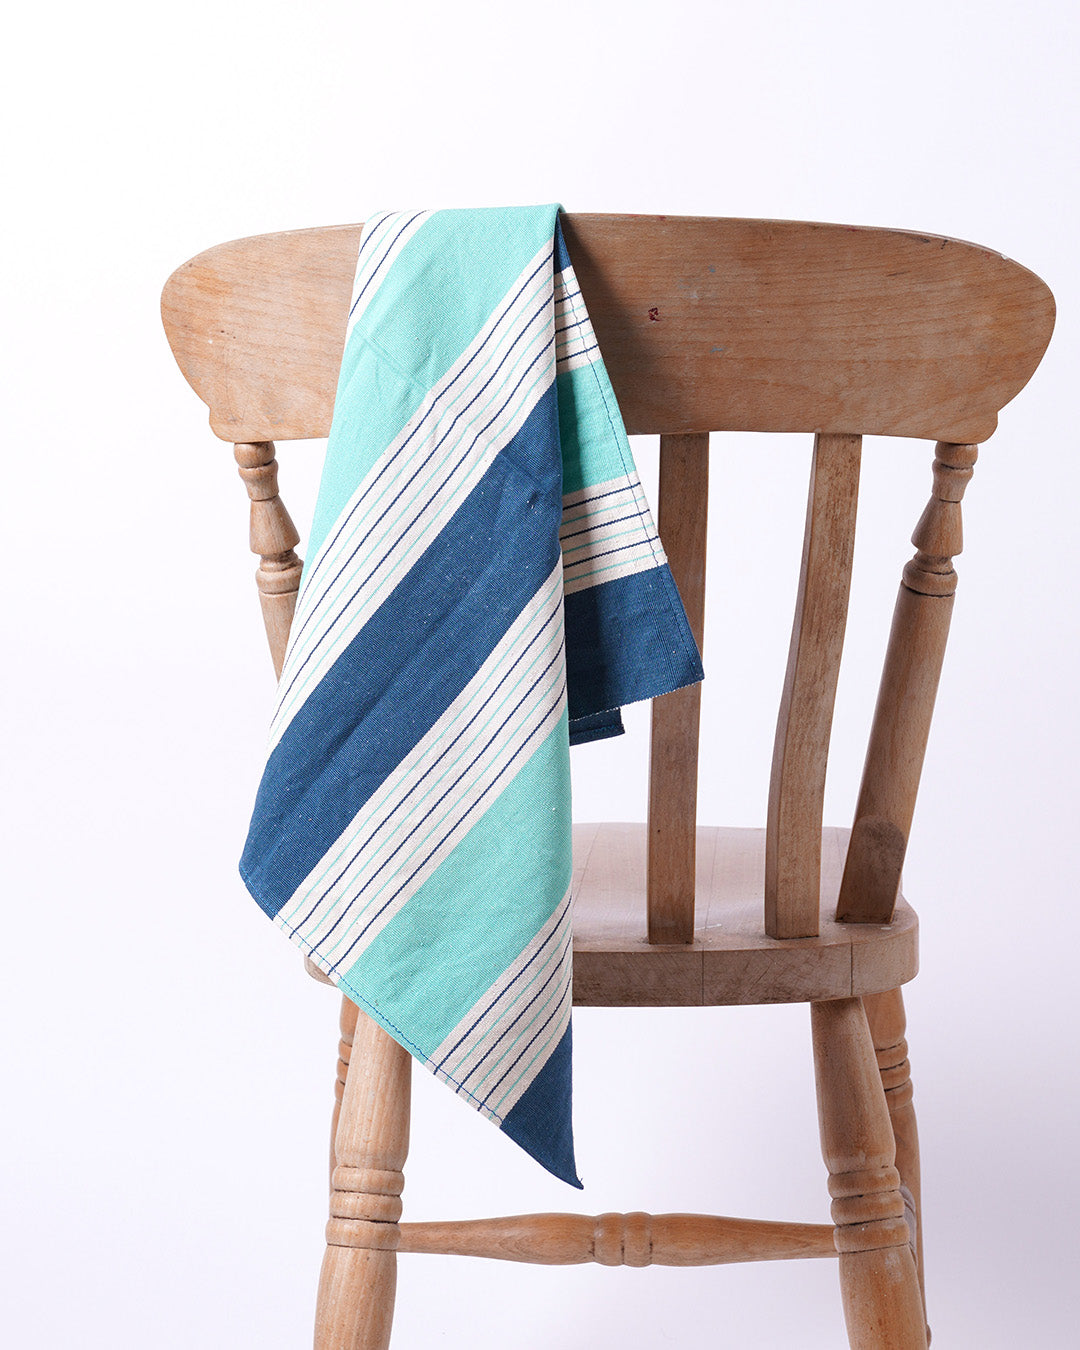 Cool Stripes Napkin - Teal, Turquoise and Cream Stripes